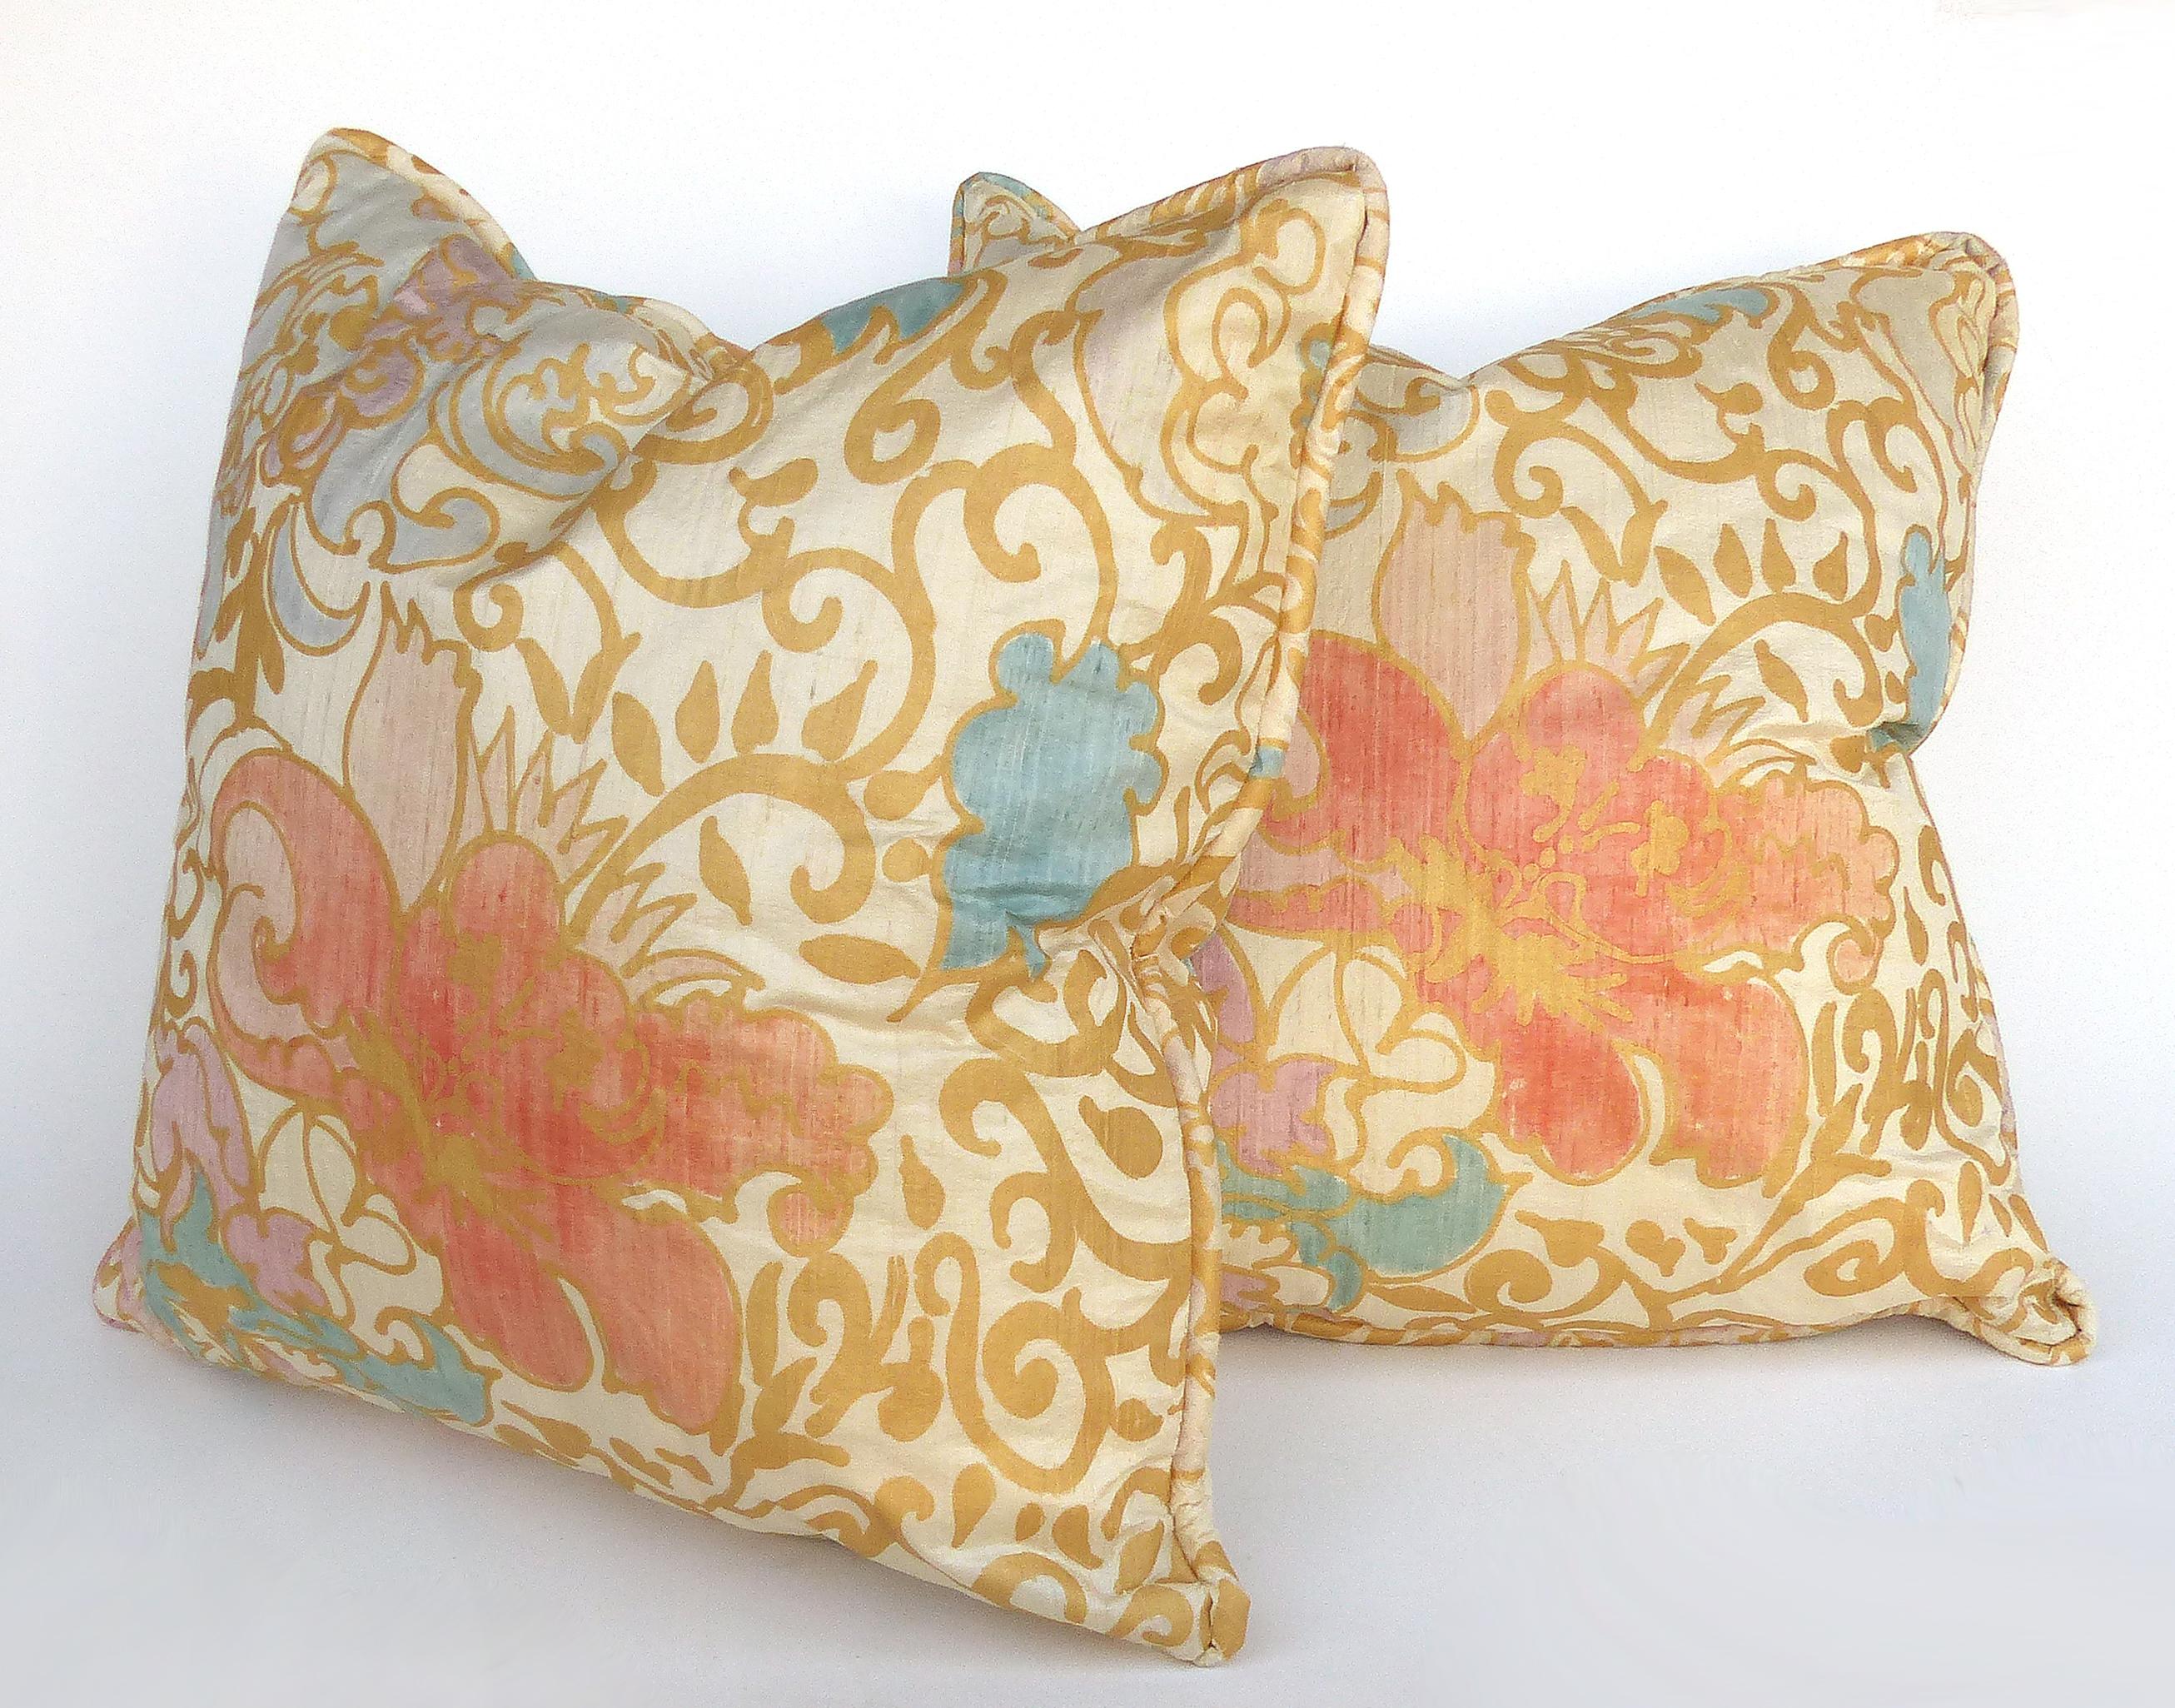 Barbara Beckmann Hand-Printed Silk Pillows
Offered for sale is a pair of Barbara Beckman hand-printed silk pillows. Barbara Beckmann is renowned for acquiring the finest silk fabrics from around the world and hand decorating them with fabulous